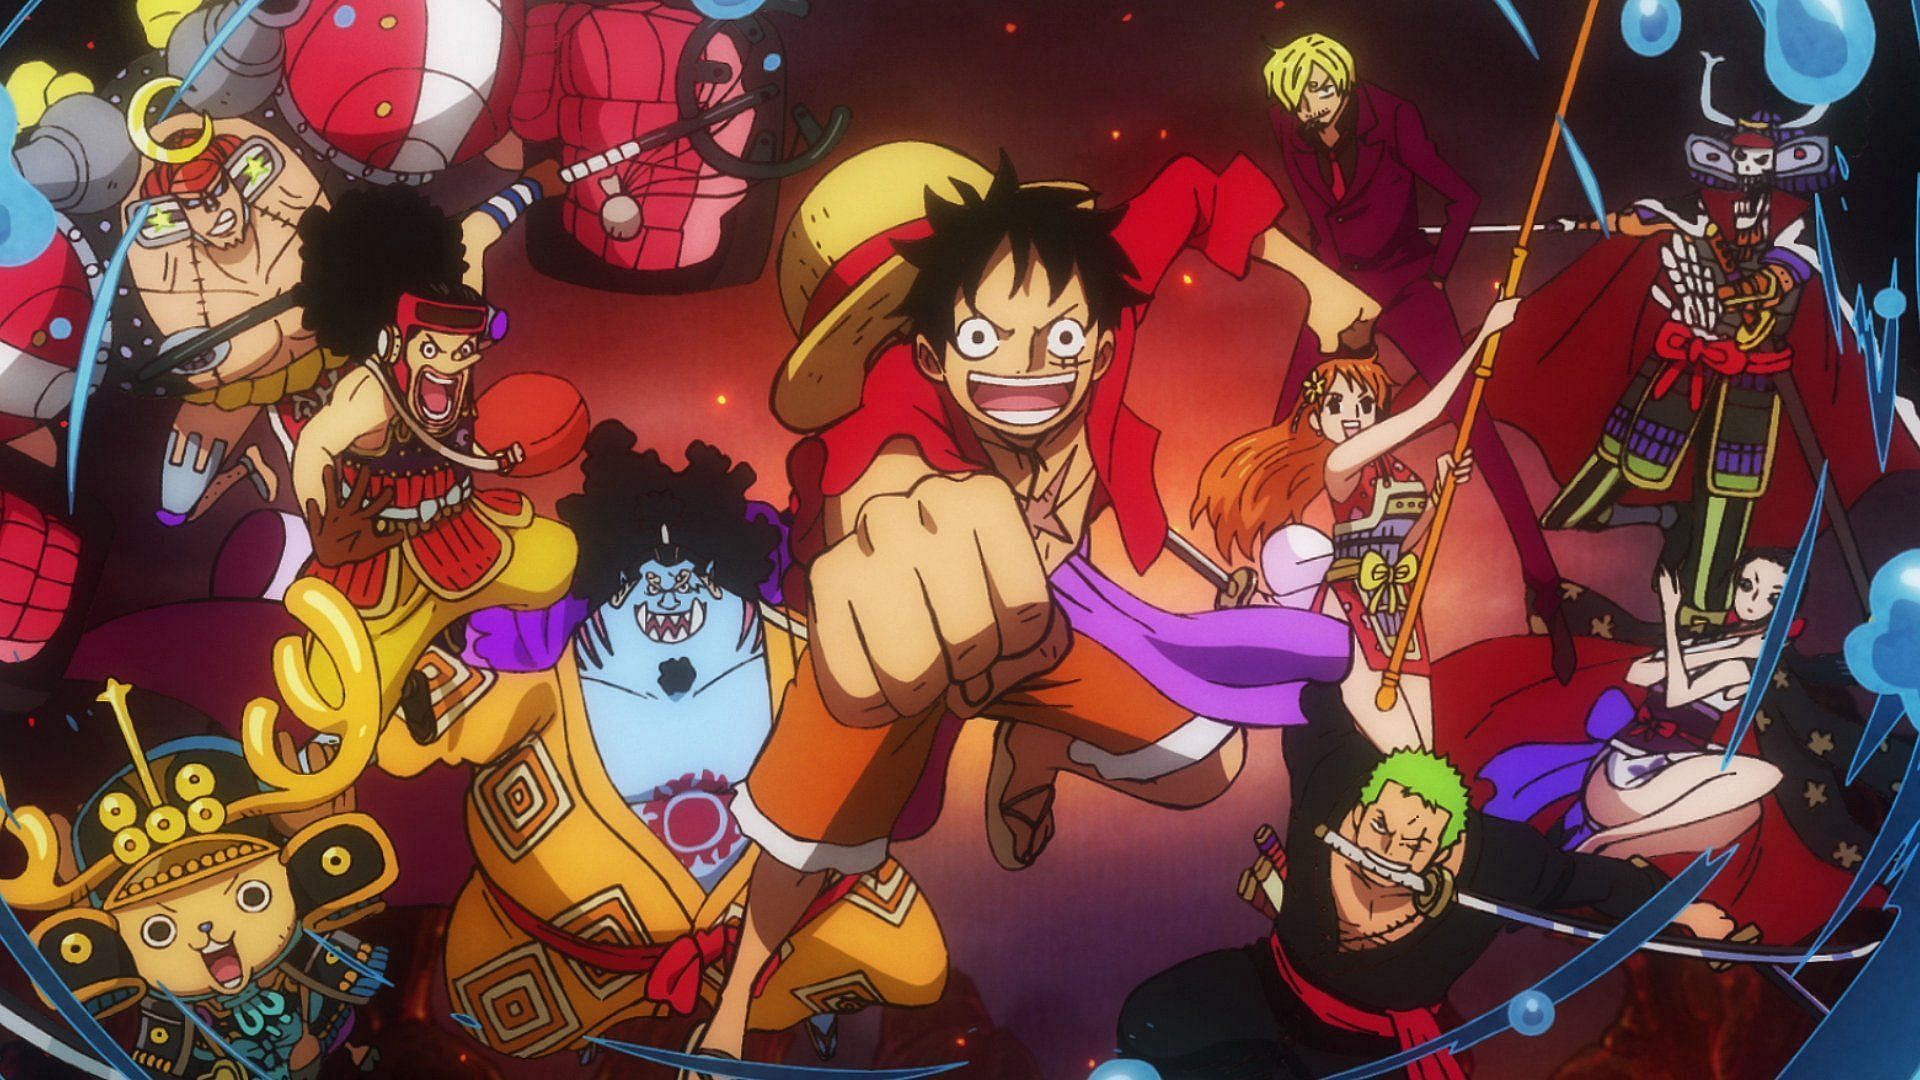 Fans will almost certainly reunite with the Straw Hats upon the series